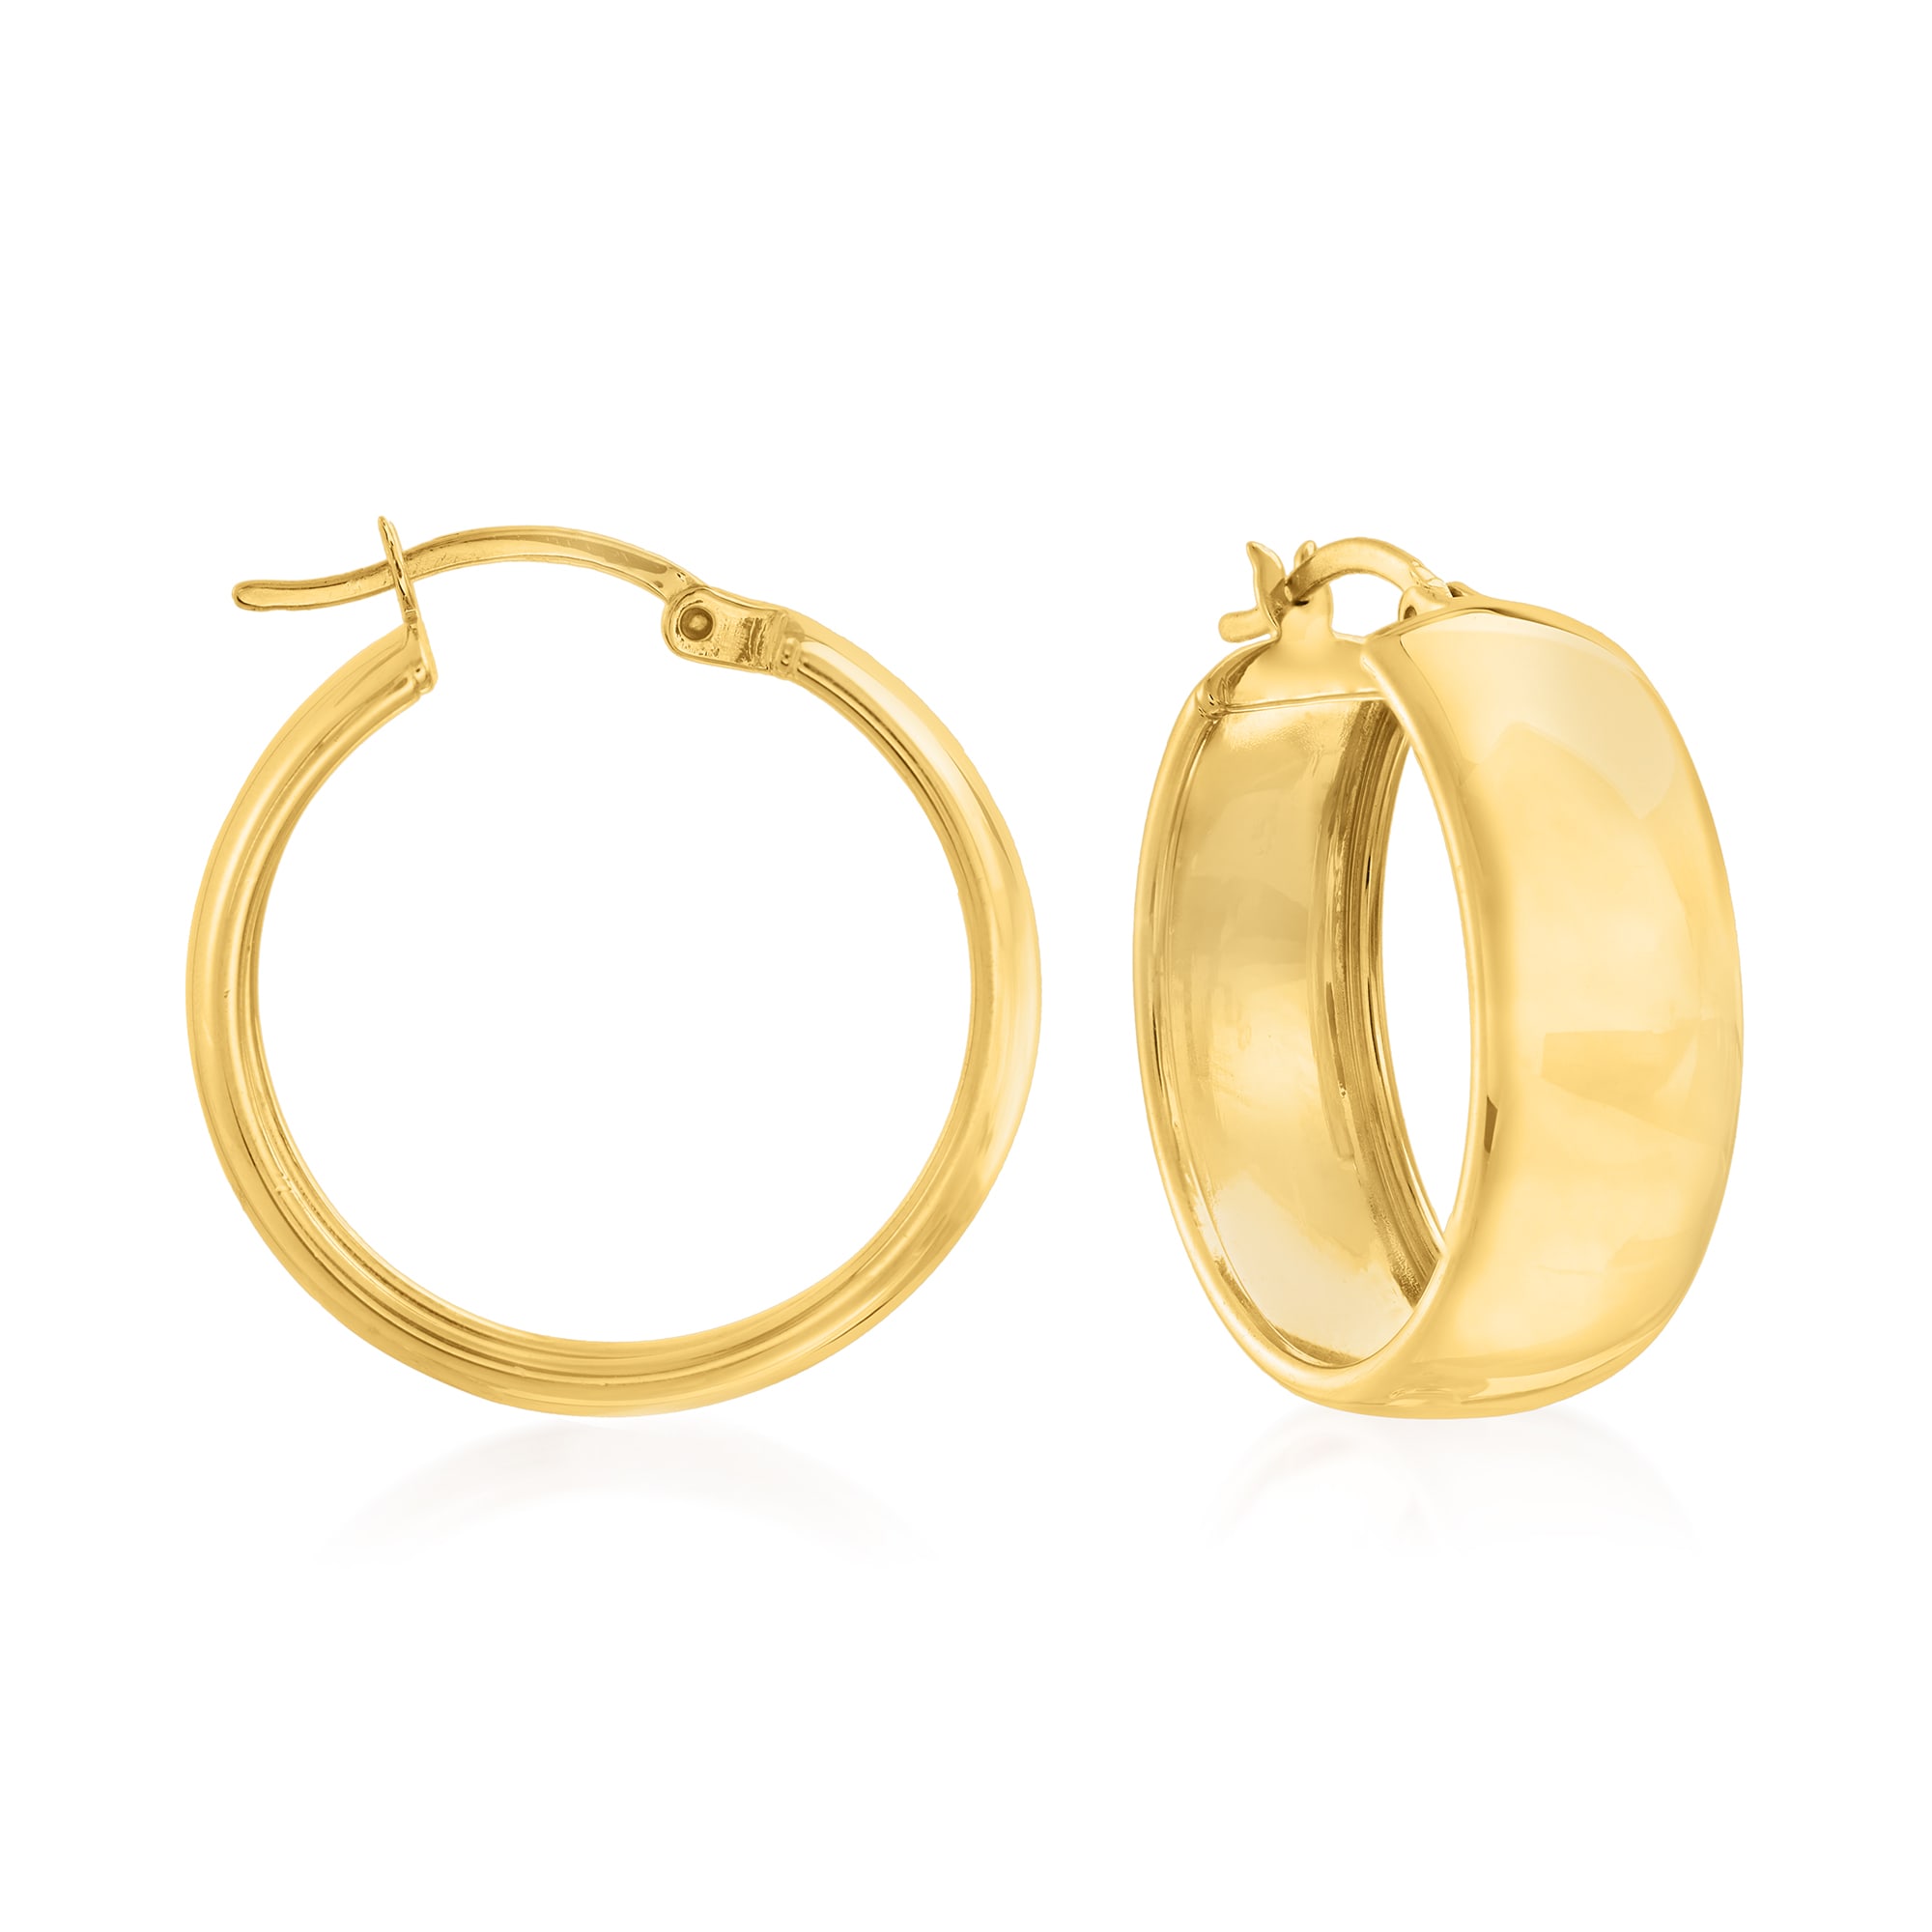 18kt Yellow Gold Over Sterling Silver Hoop Earrings. 1